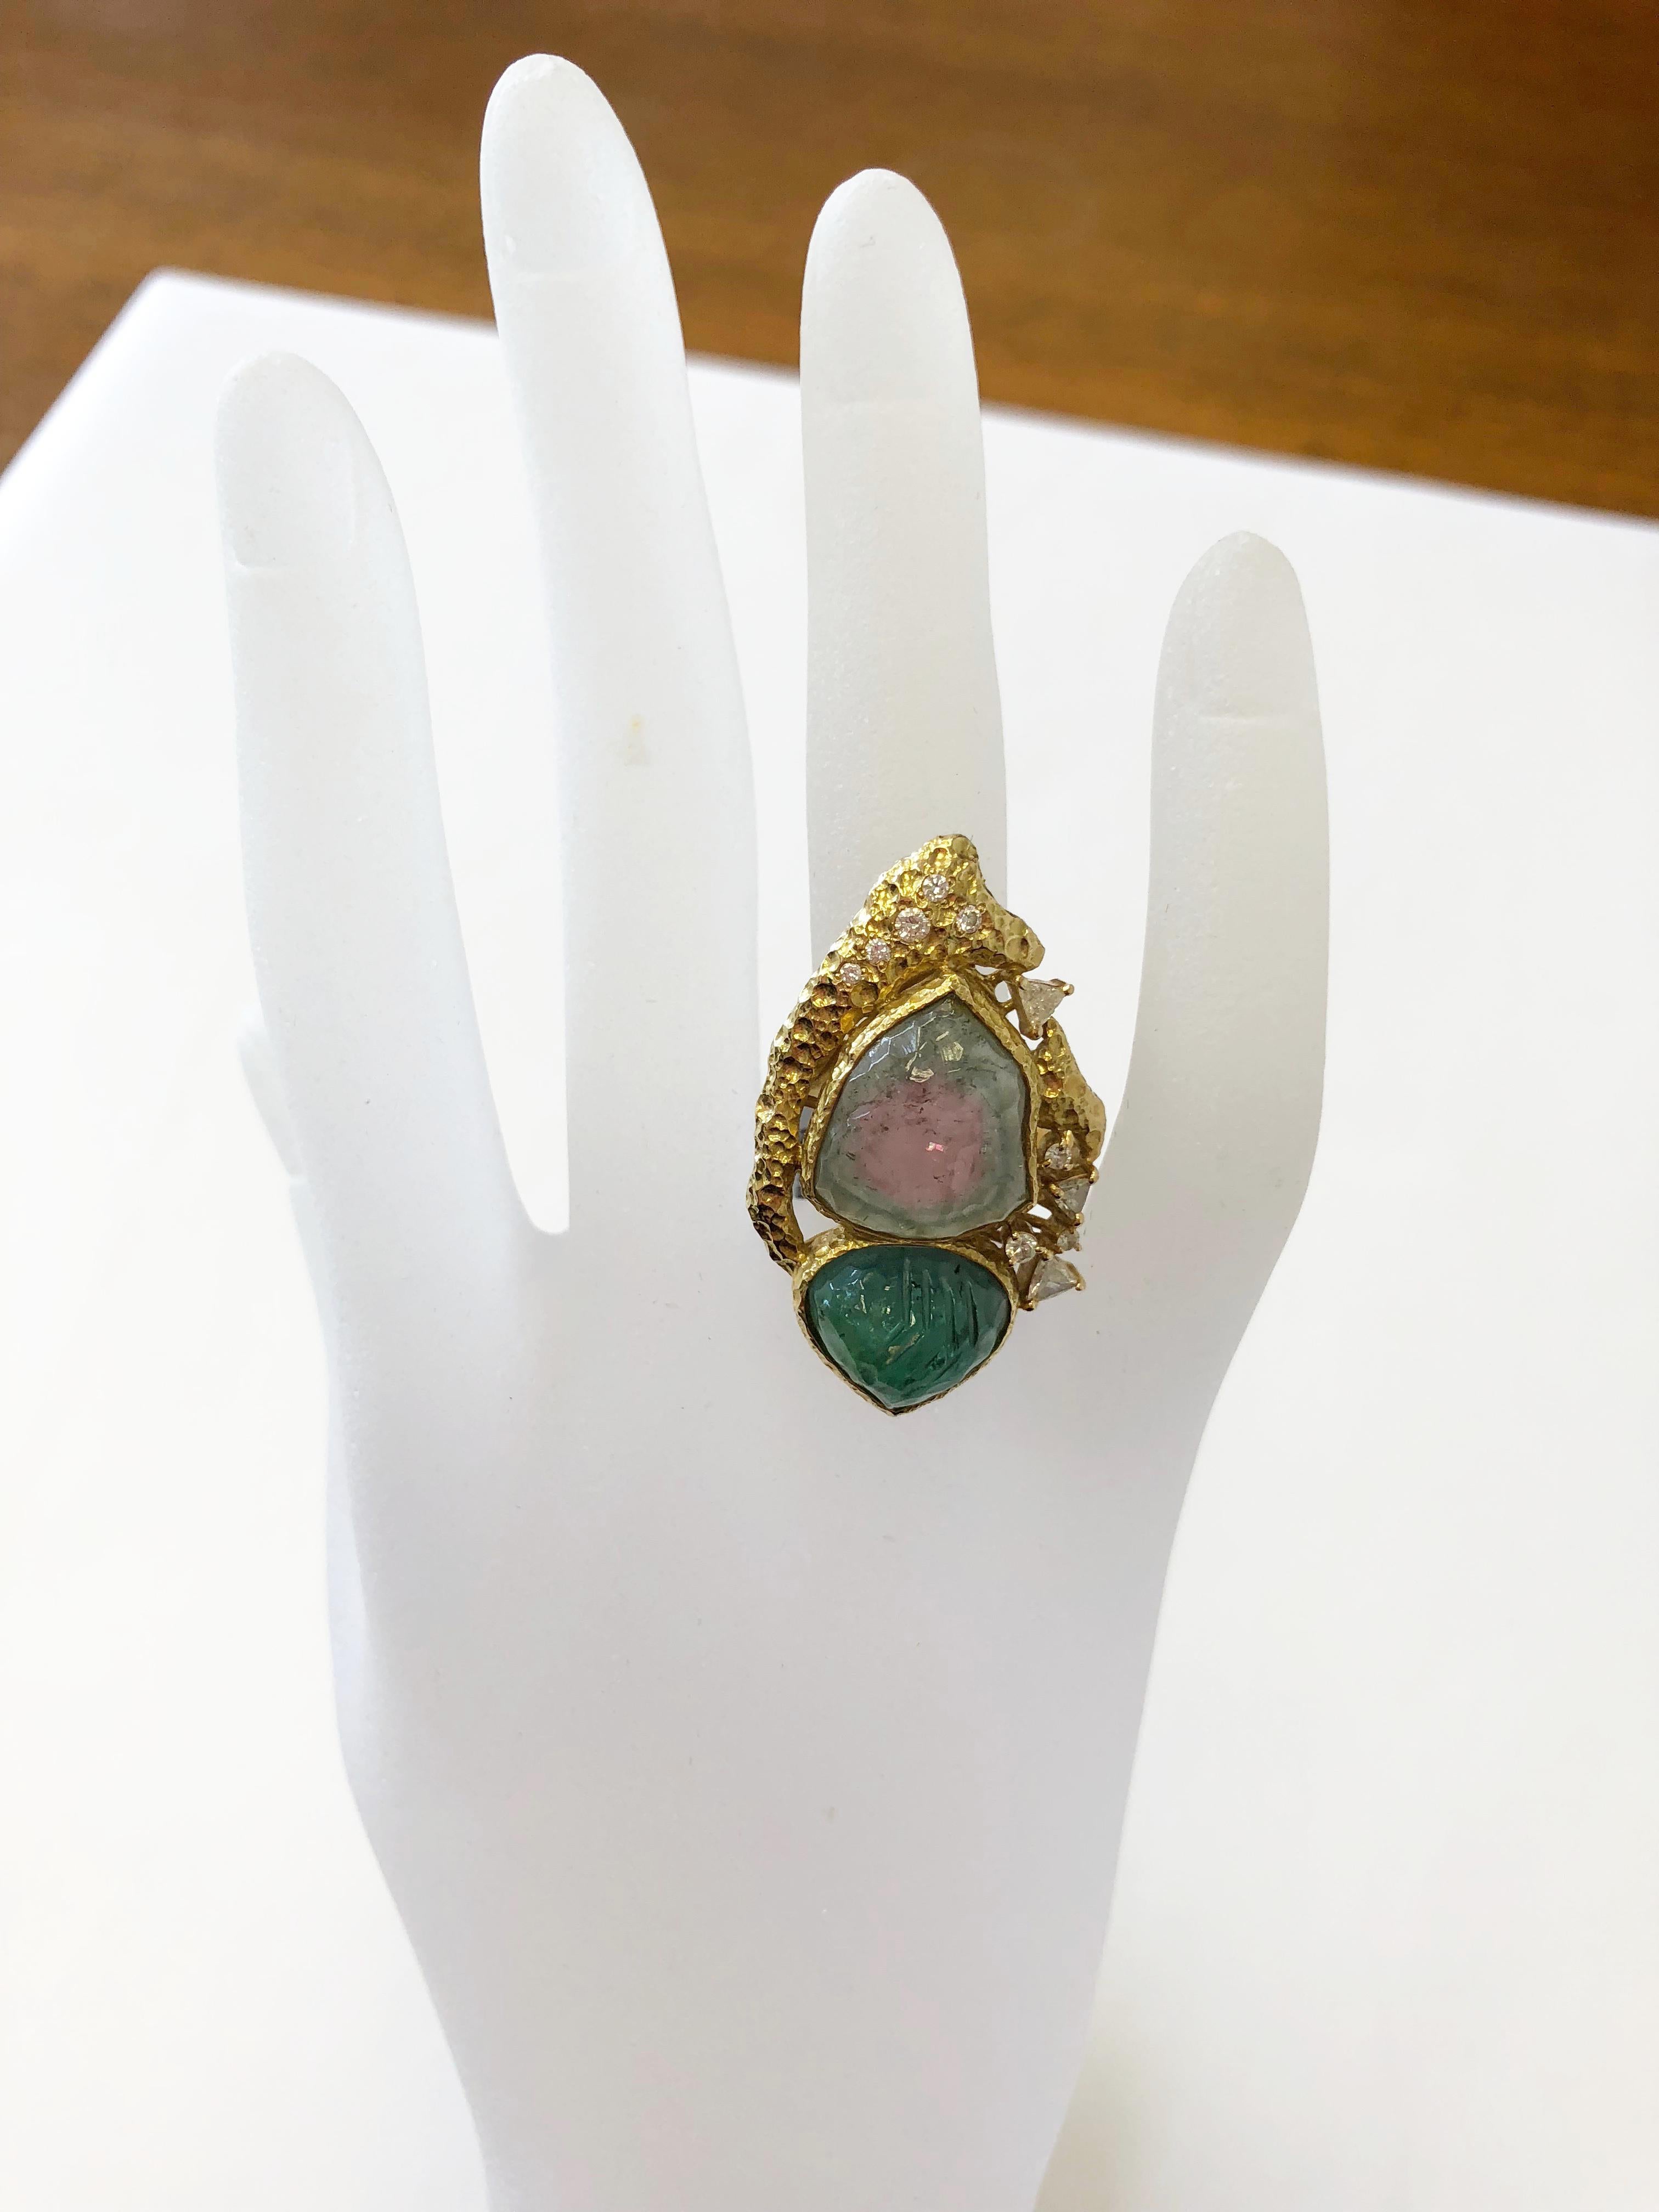 Stunning 14.22 carat carved watermelon tourmaline with carved emerald and 0.37 carats of white diamond trillion and round.  This beautiful estate ring has been handcrafted in 18k yellow gold and is a size 6.75.  Ideal for someone who appreciates the